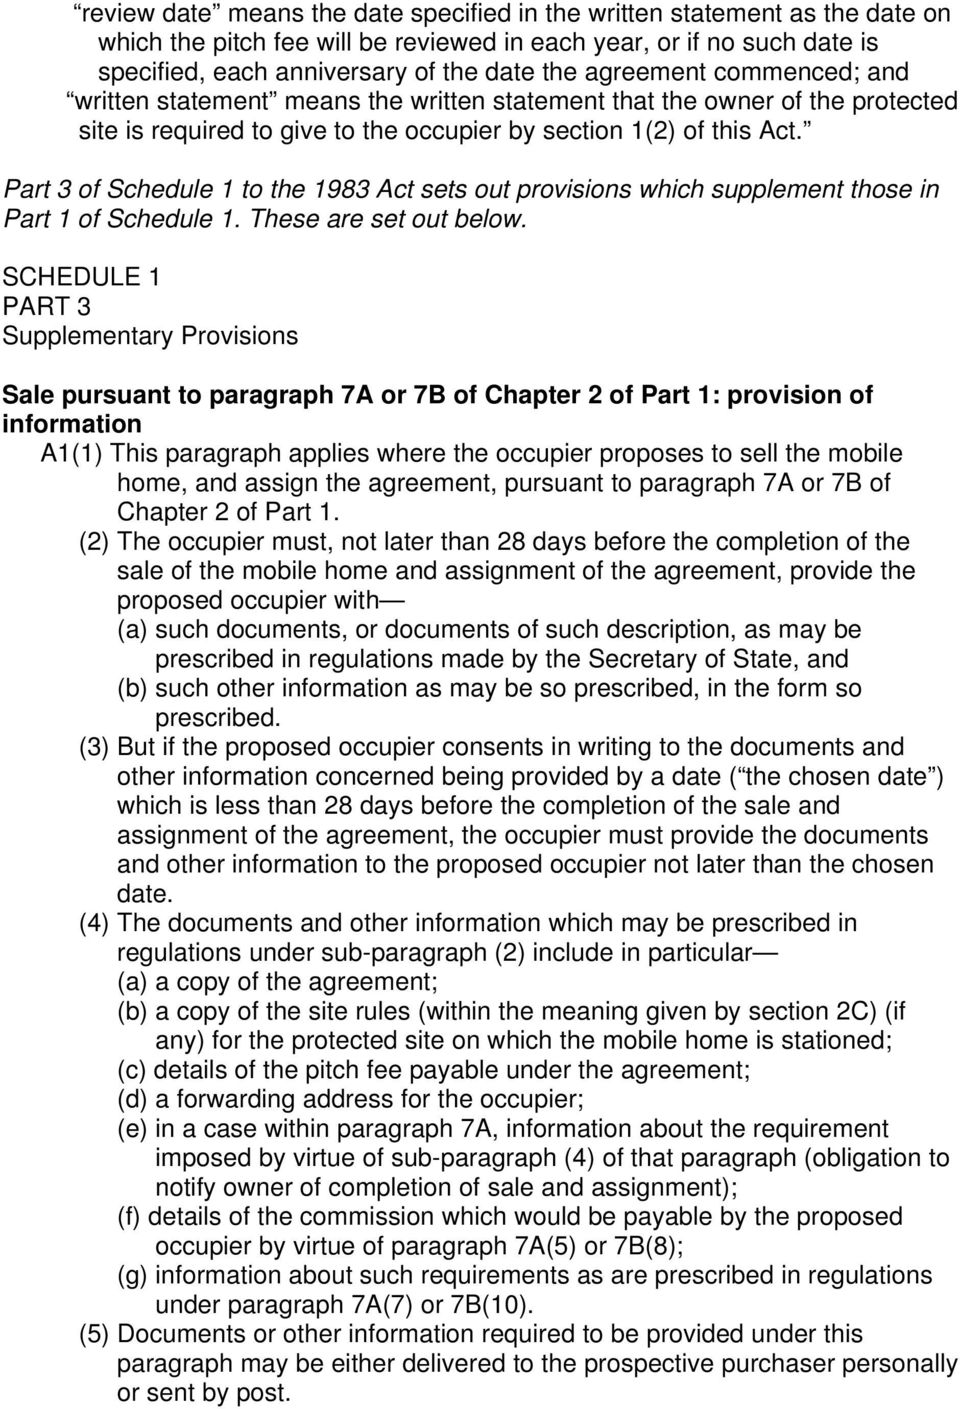 Part 3 of Schedule 1 to the 1983 Act sets out provisions which supplement those in Part 1 of Schedule 1. These are set out below.